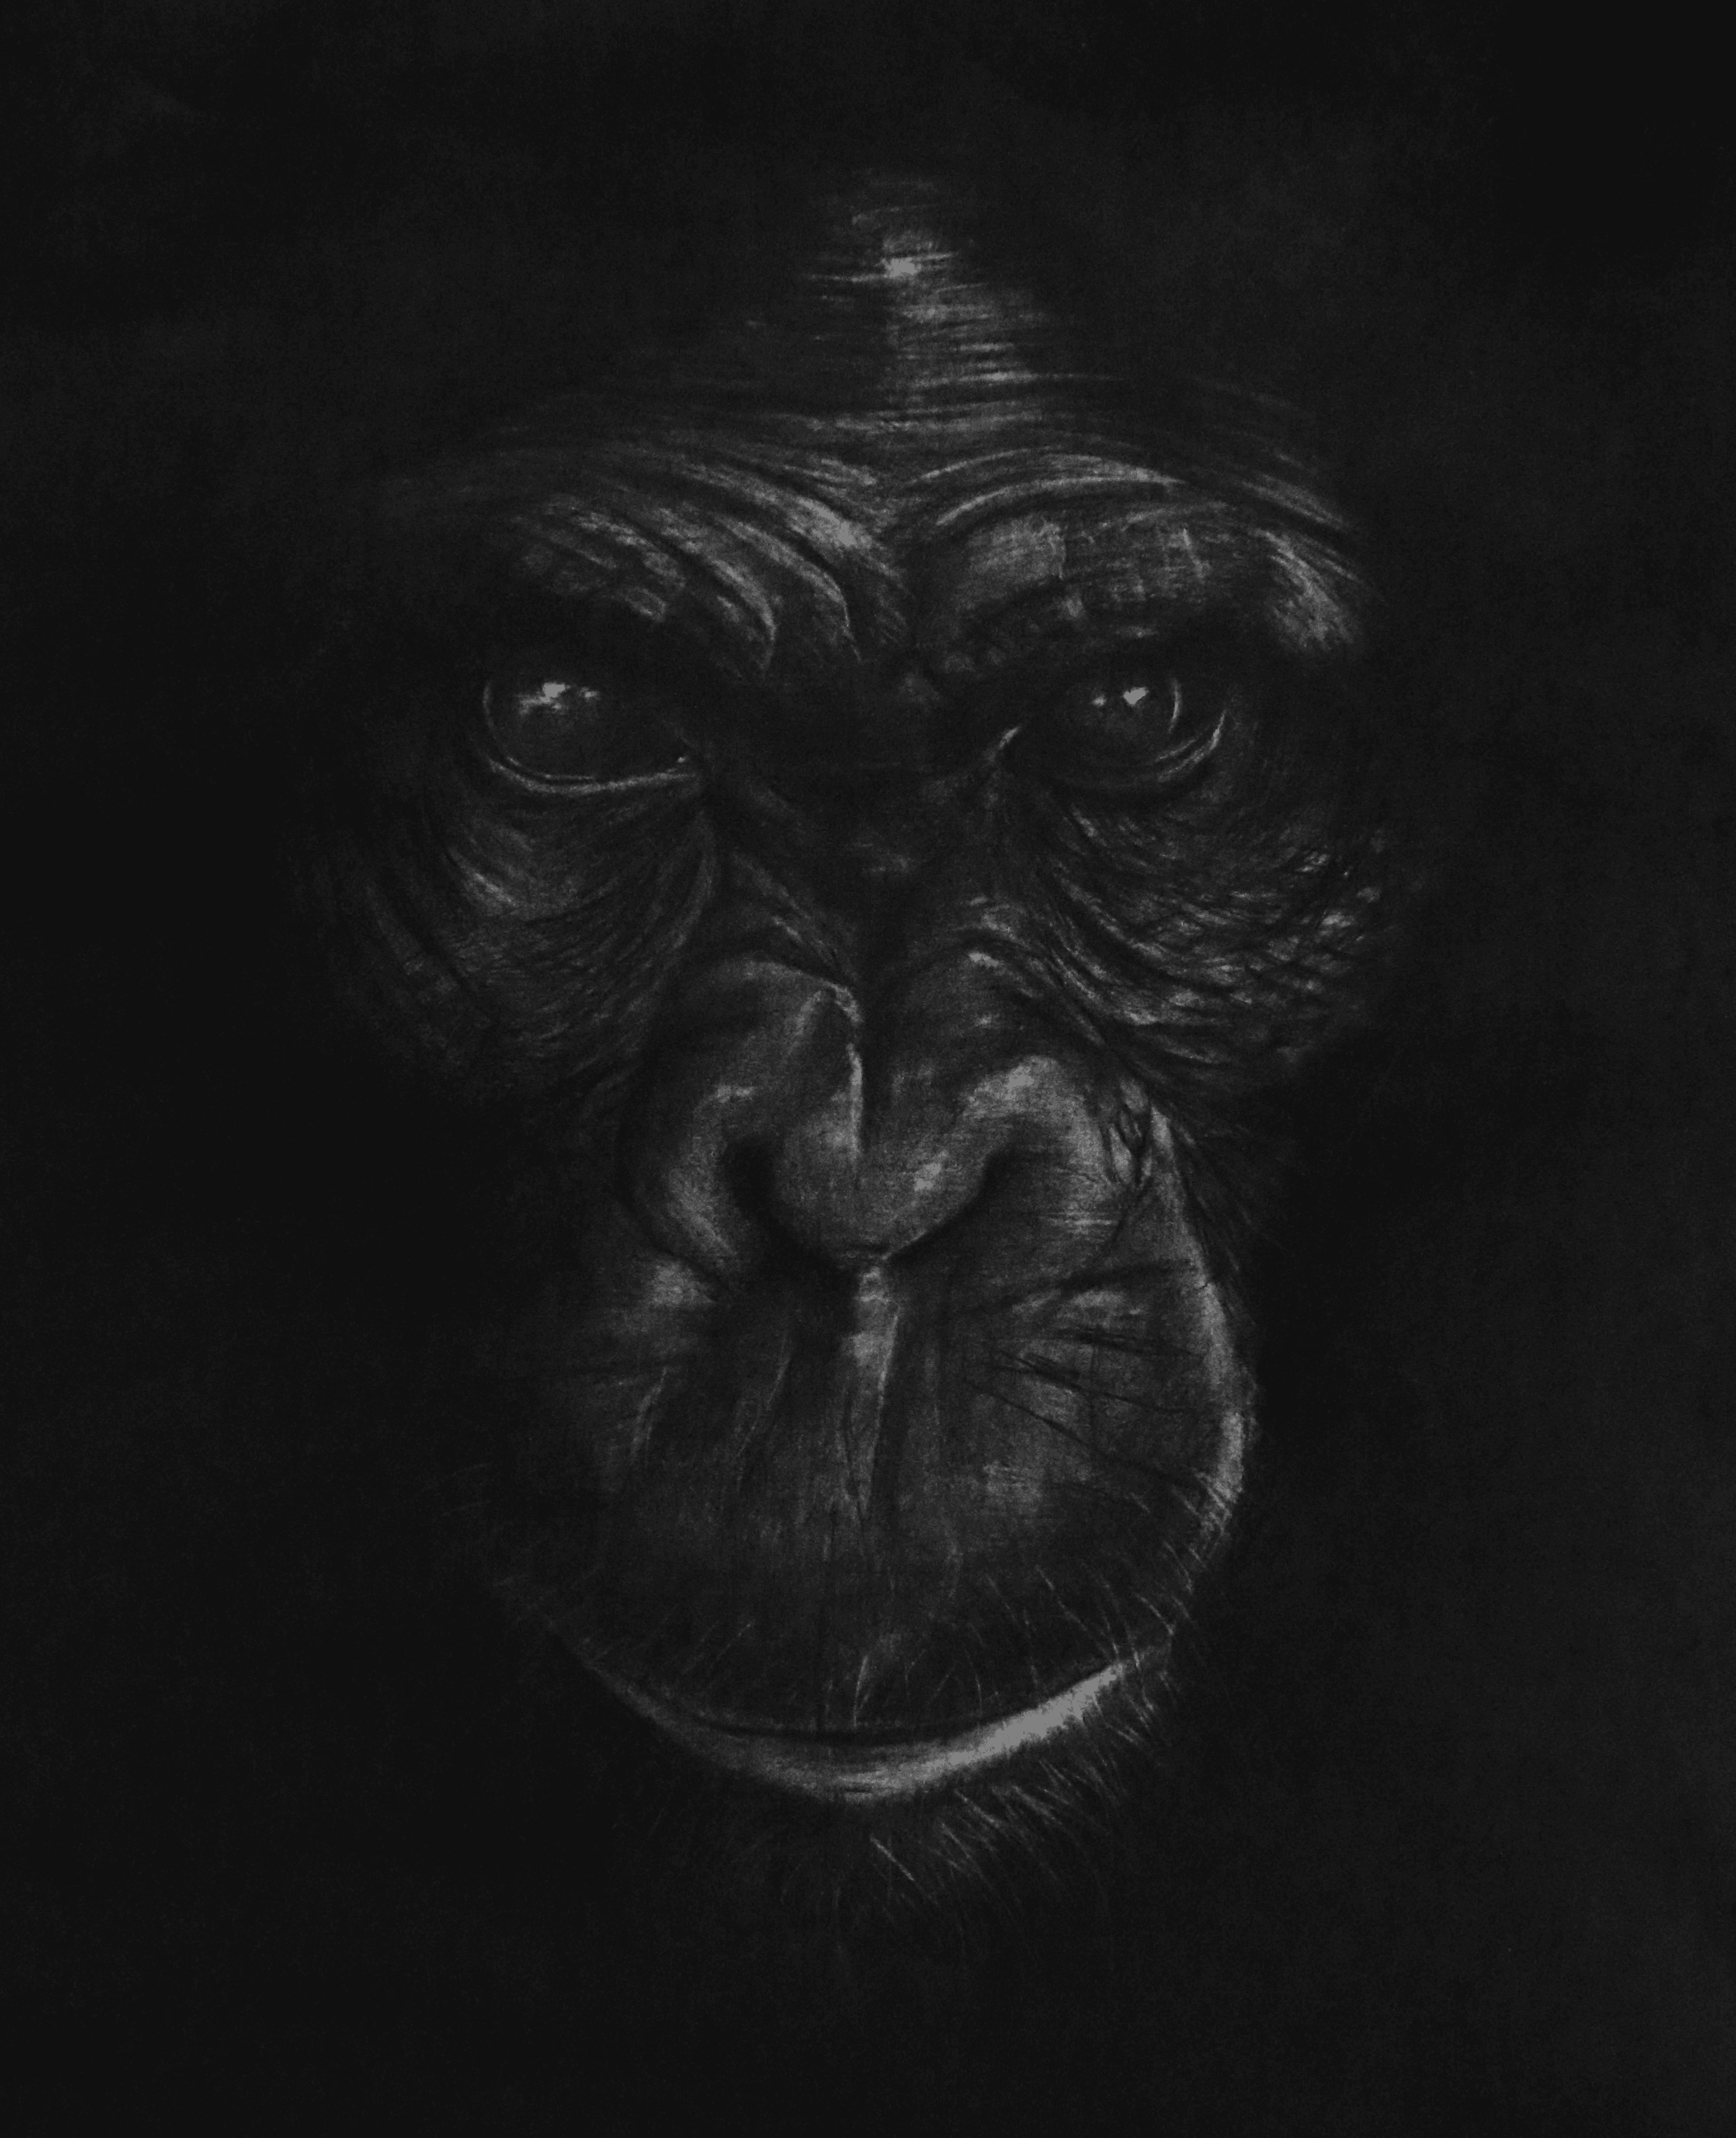 The Great Ape